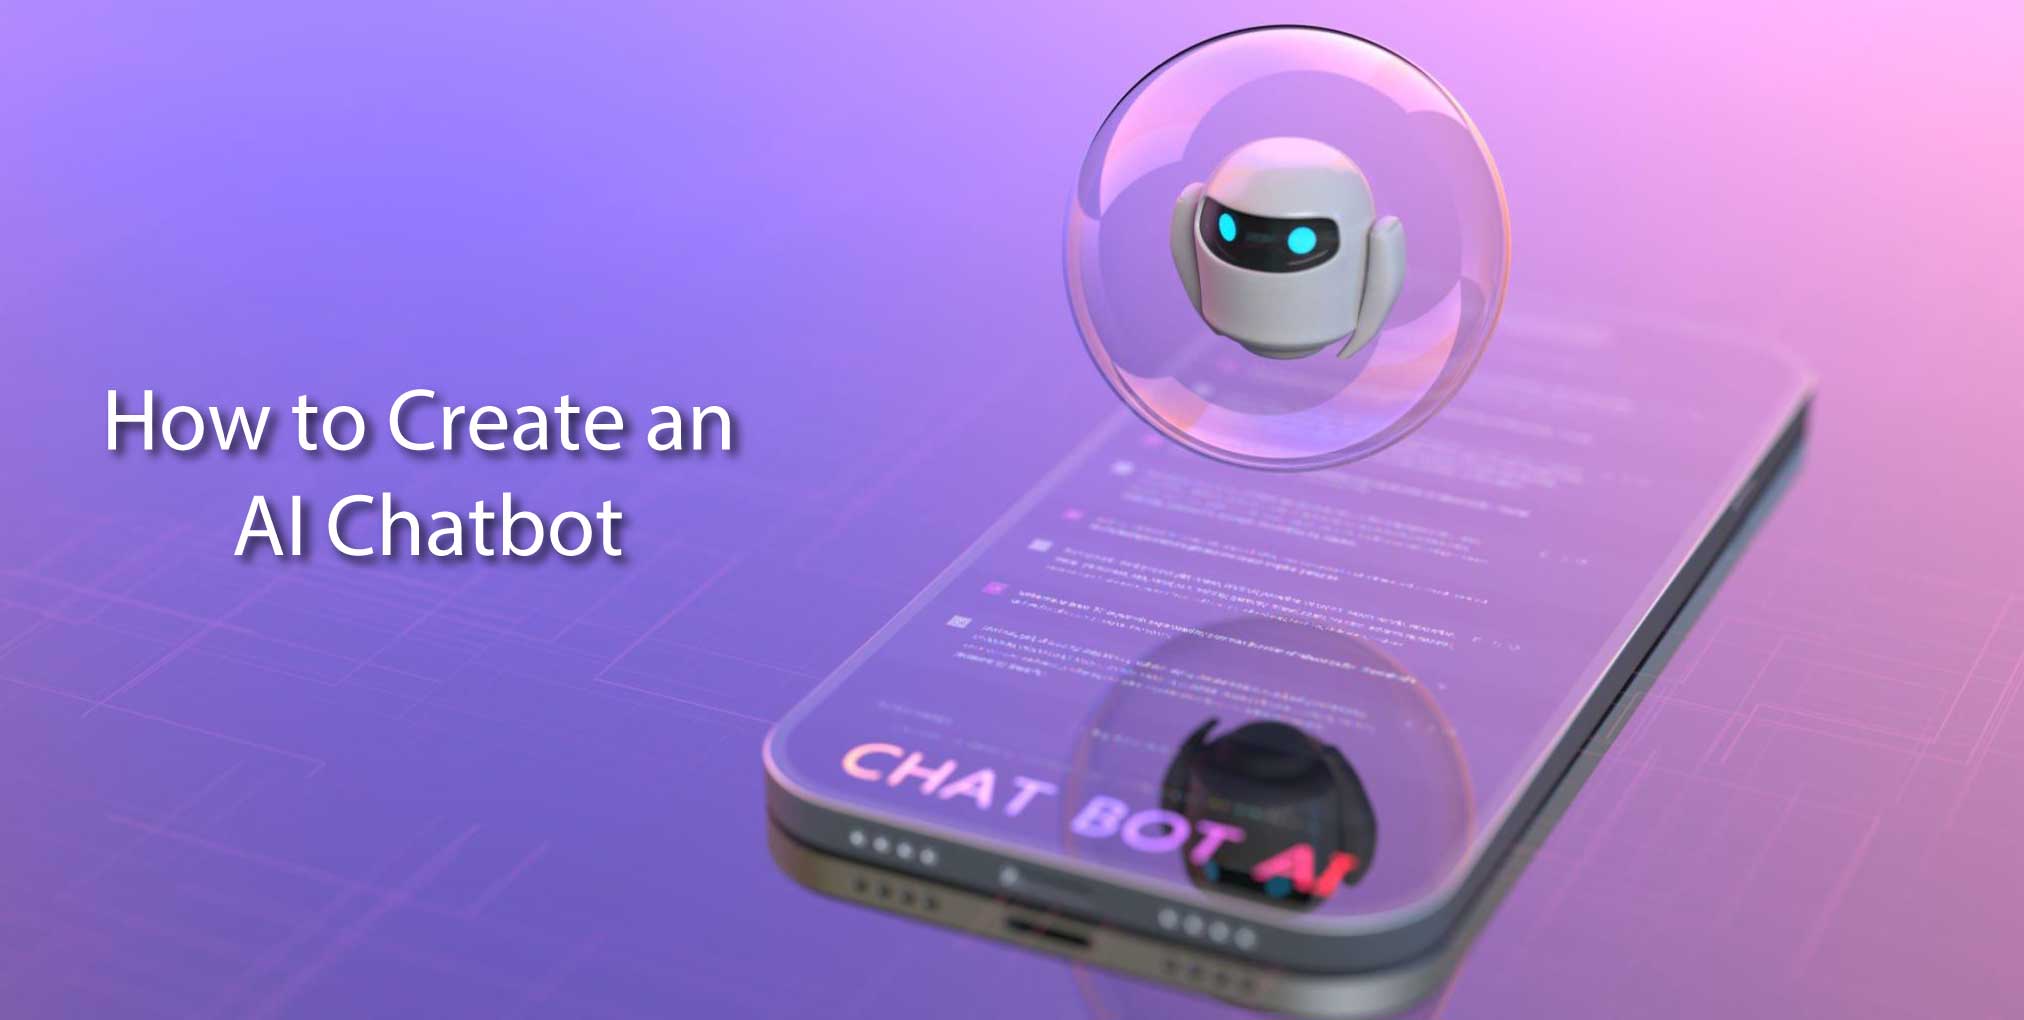 An Easy Guide on How to Create an AI Chatbot